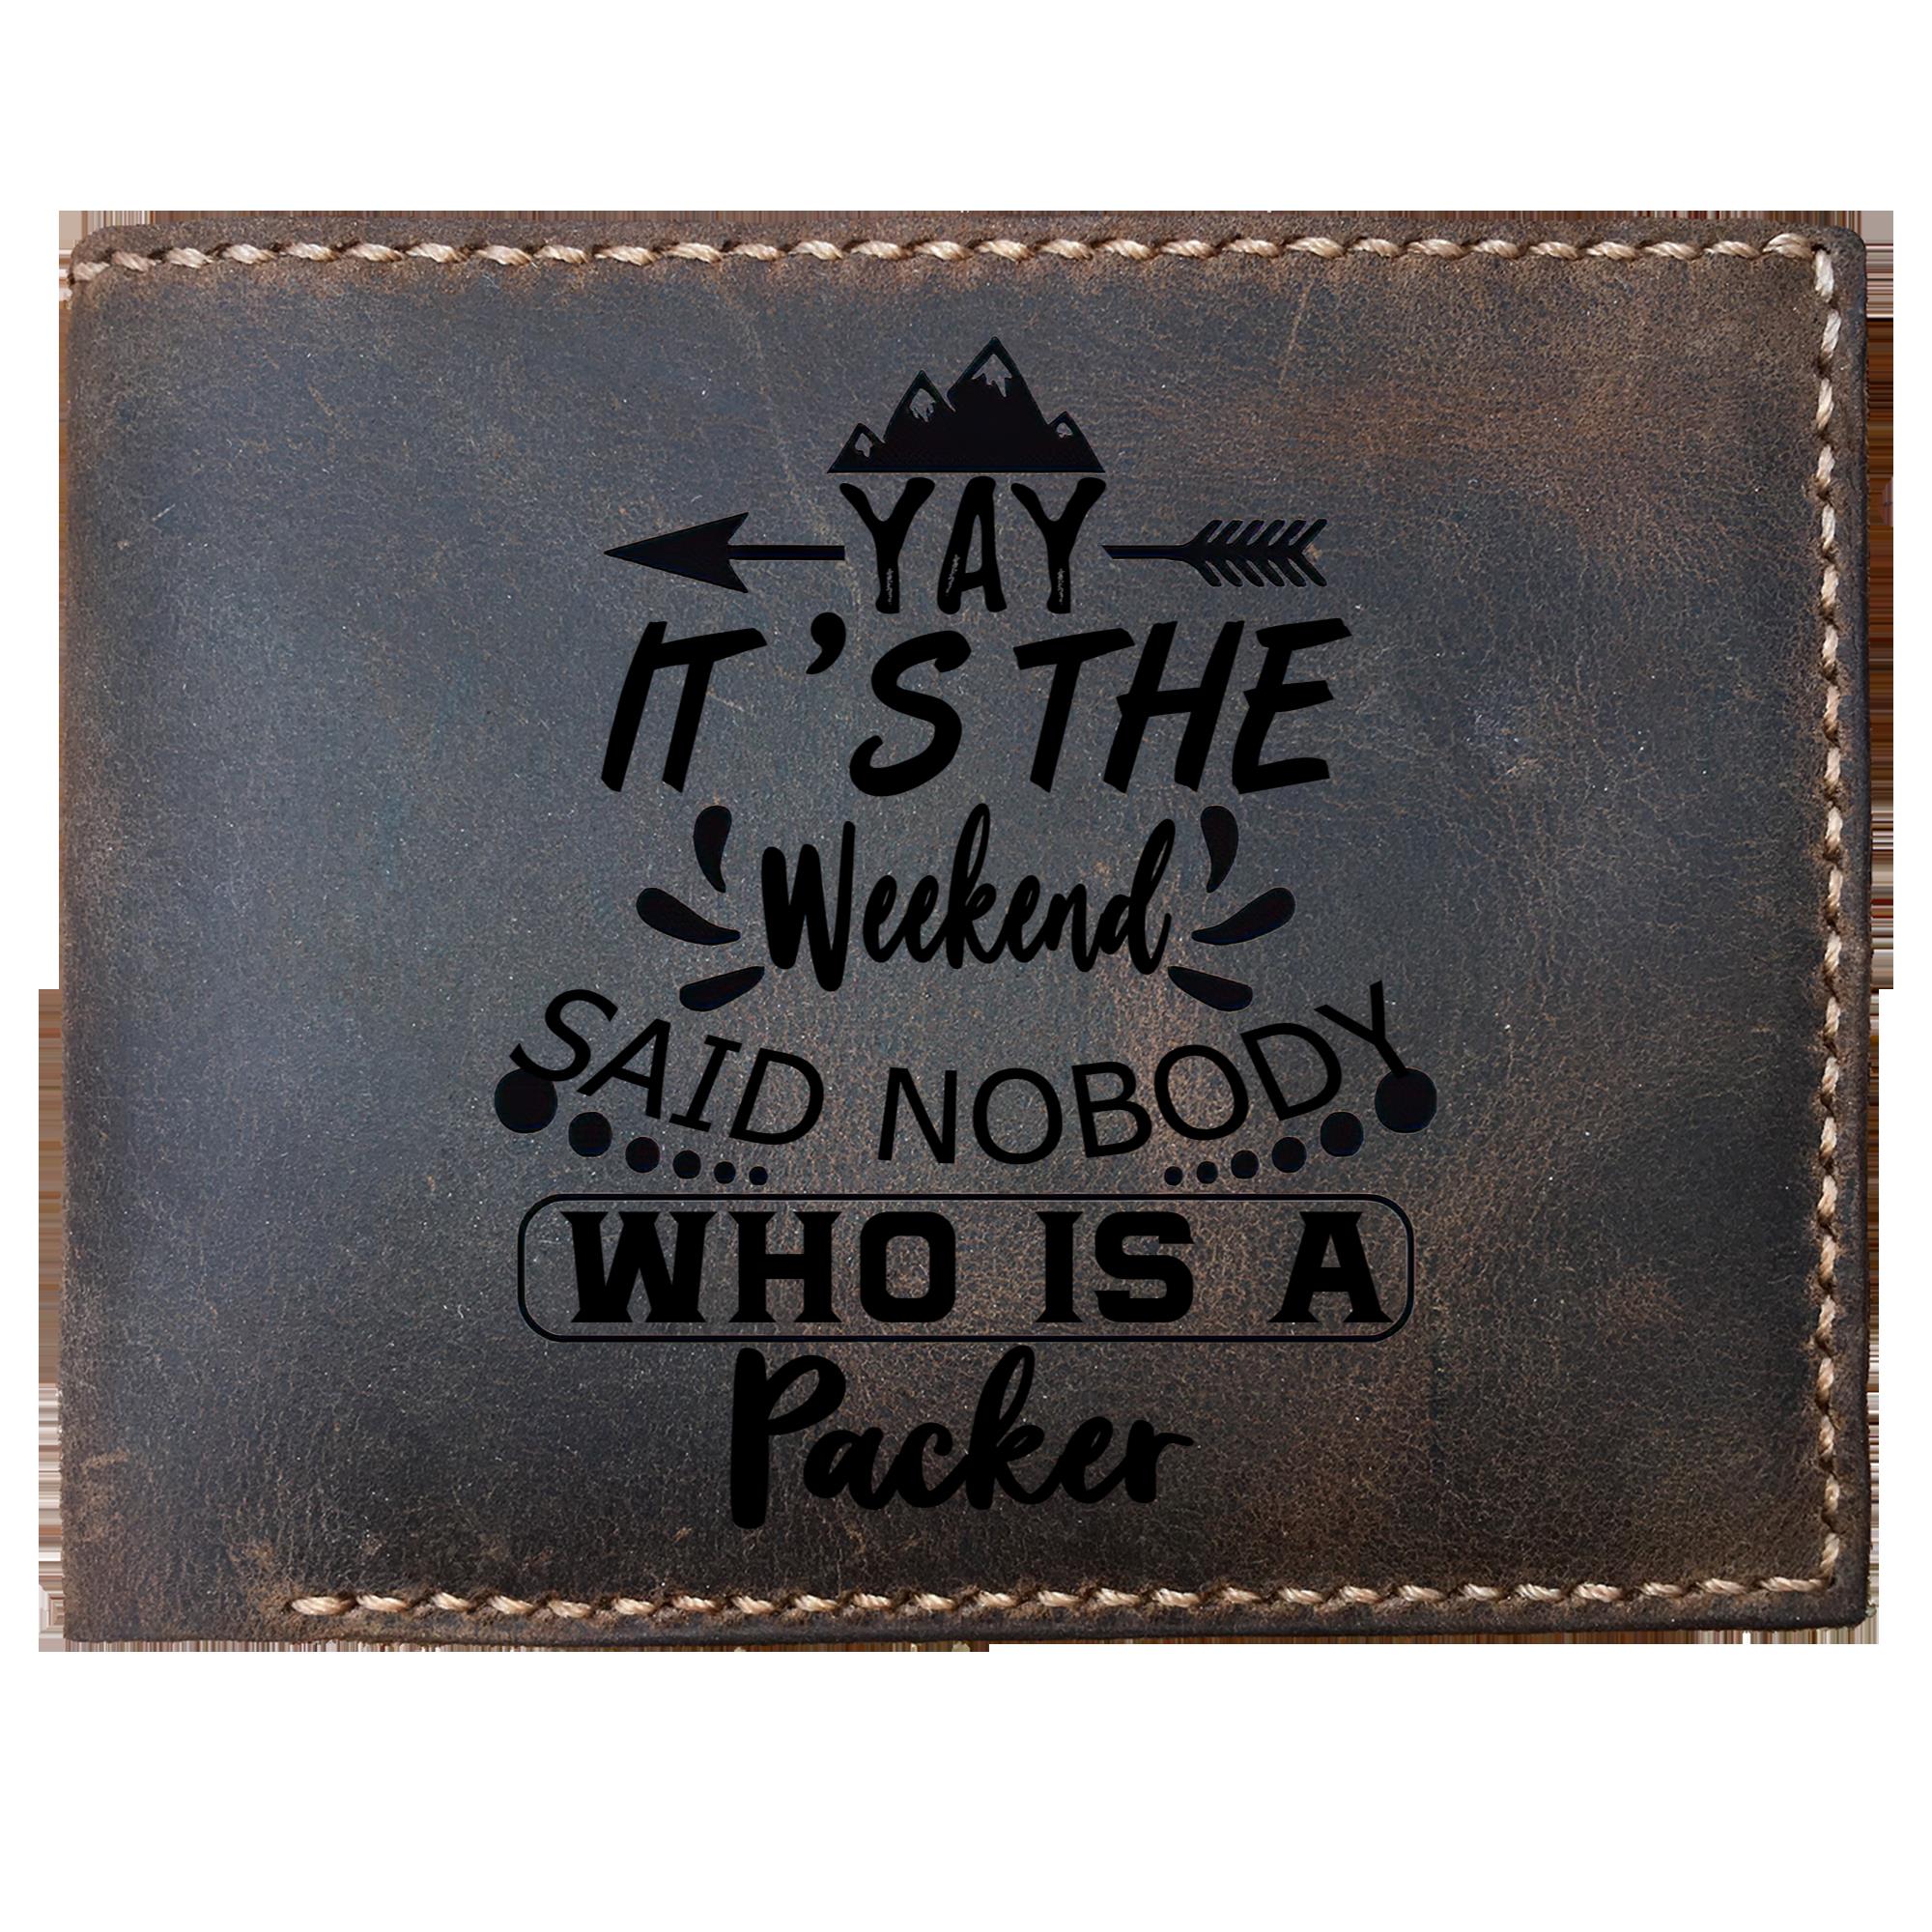 Skitongifts Funny Custom Laser Engraved Bifold Leather Wallet For Men, It's The Weekend Said Nobody Who Is A Packer, Father's Day Gifts